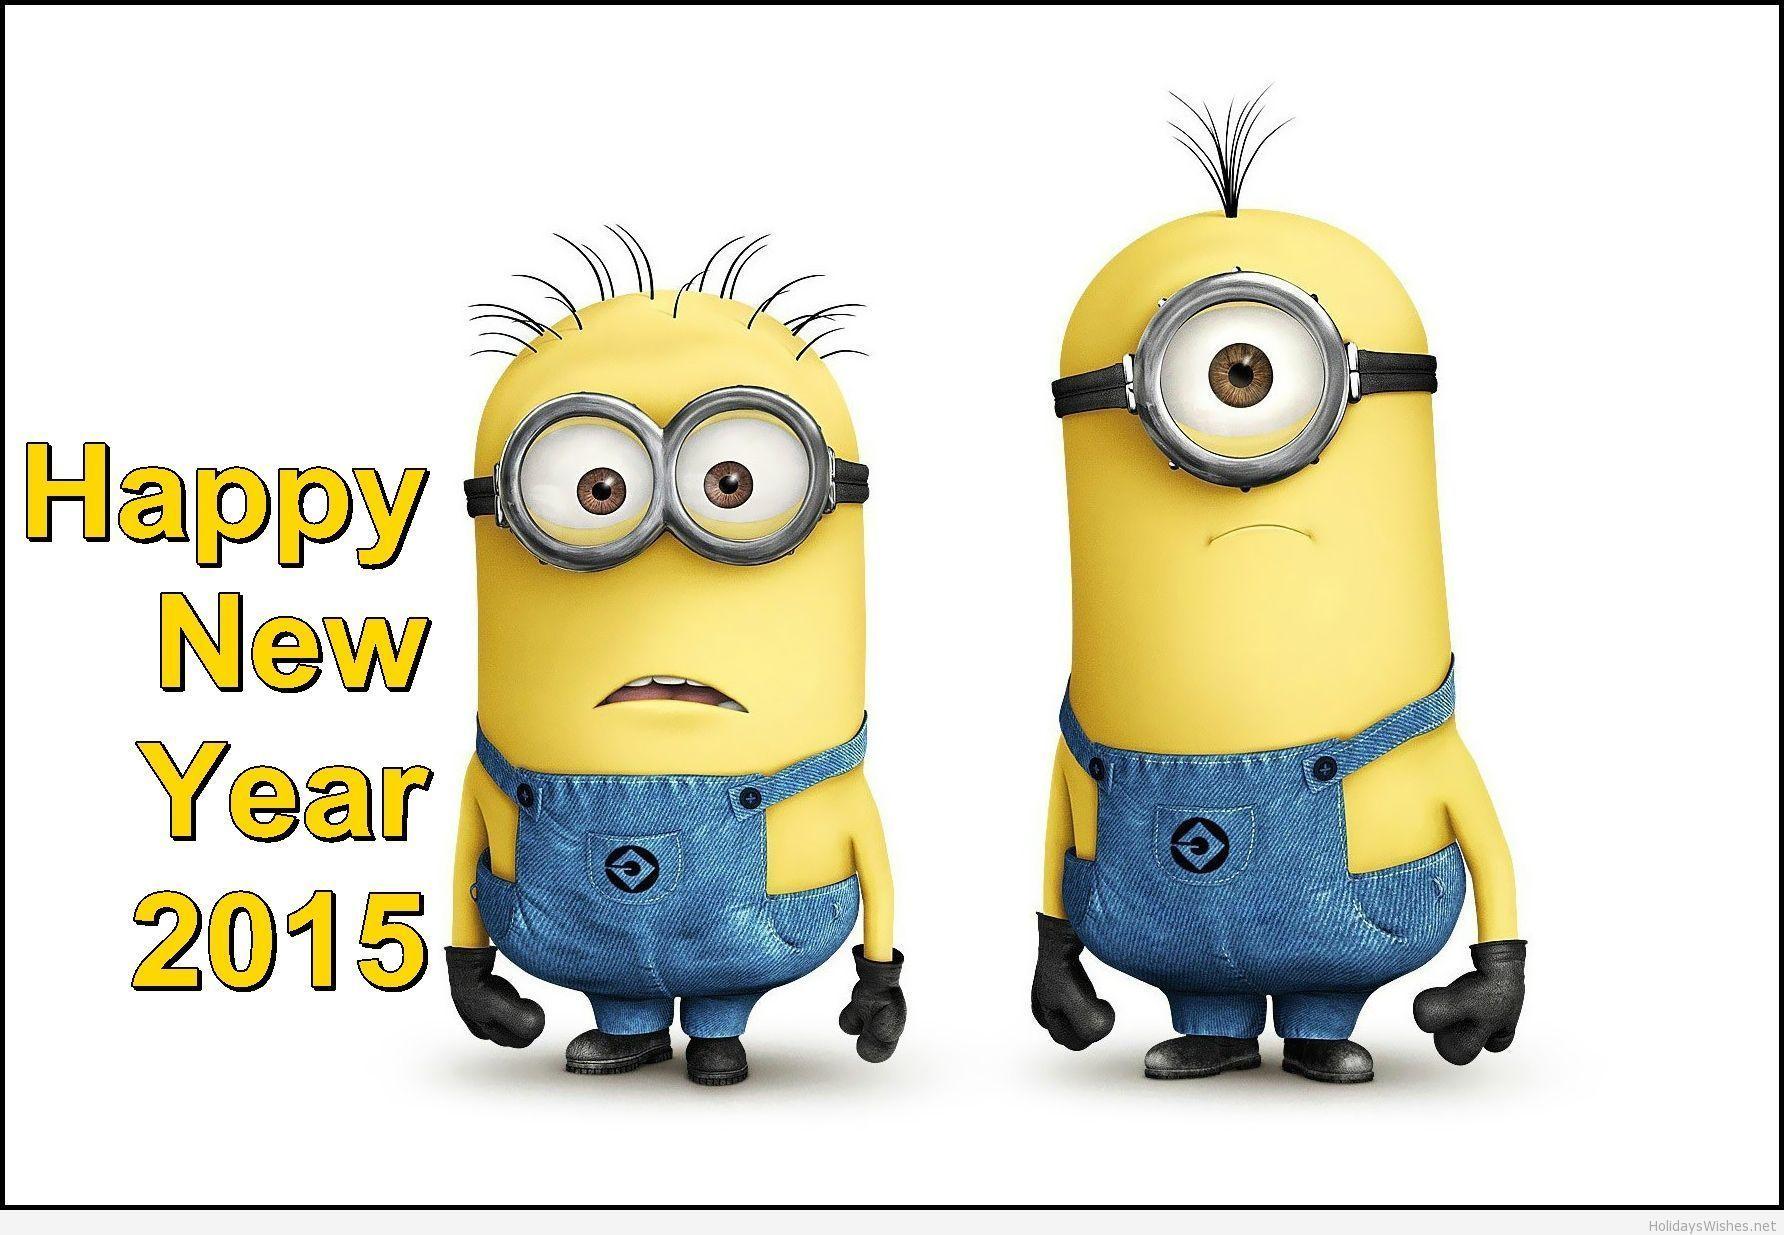 Minion wallpaper with funny faces and wish 2015